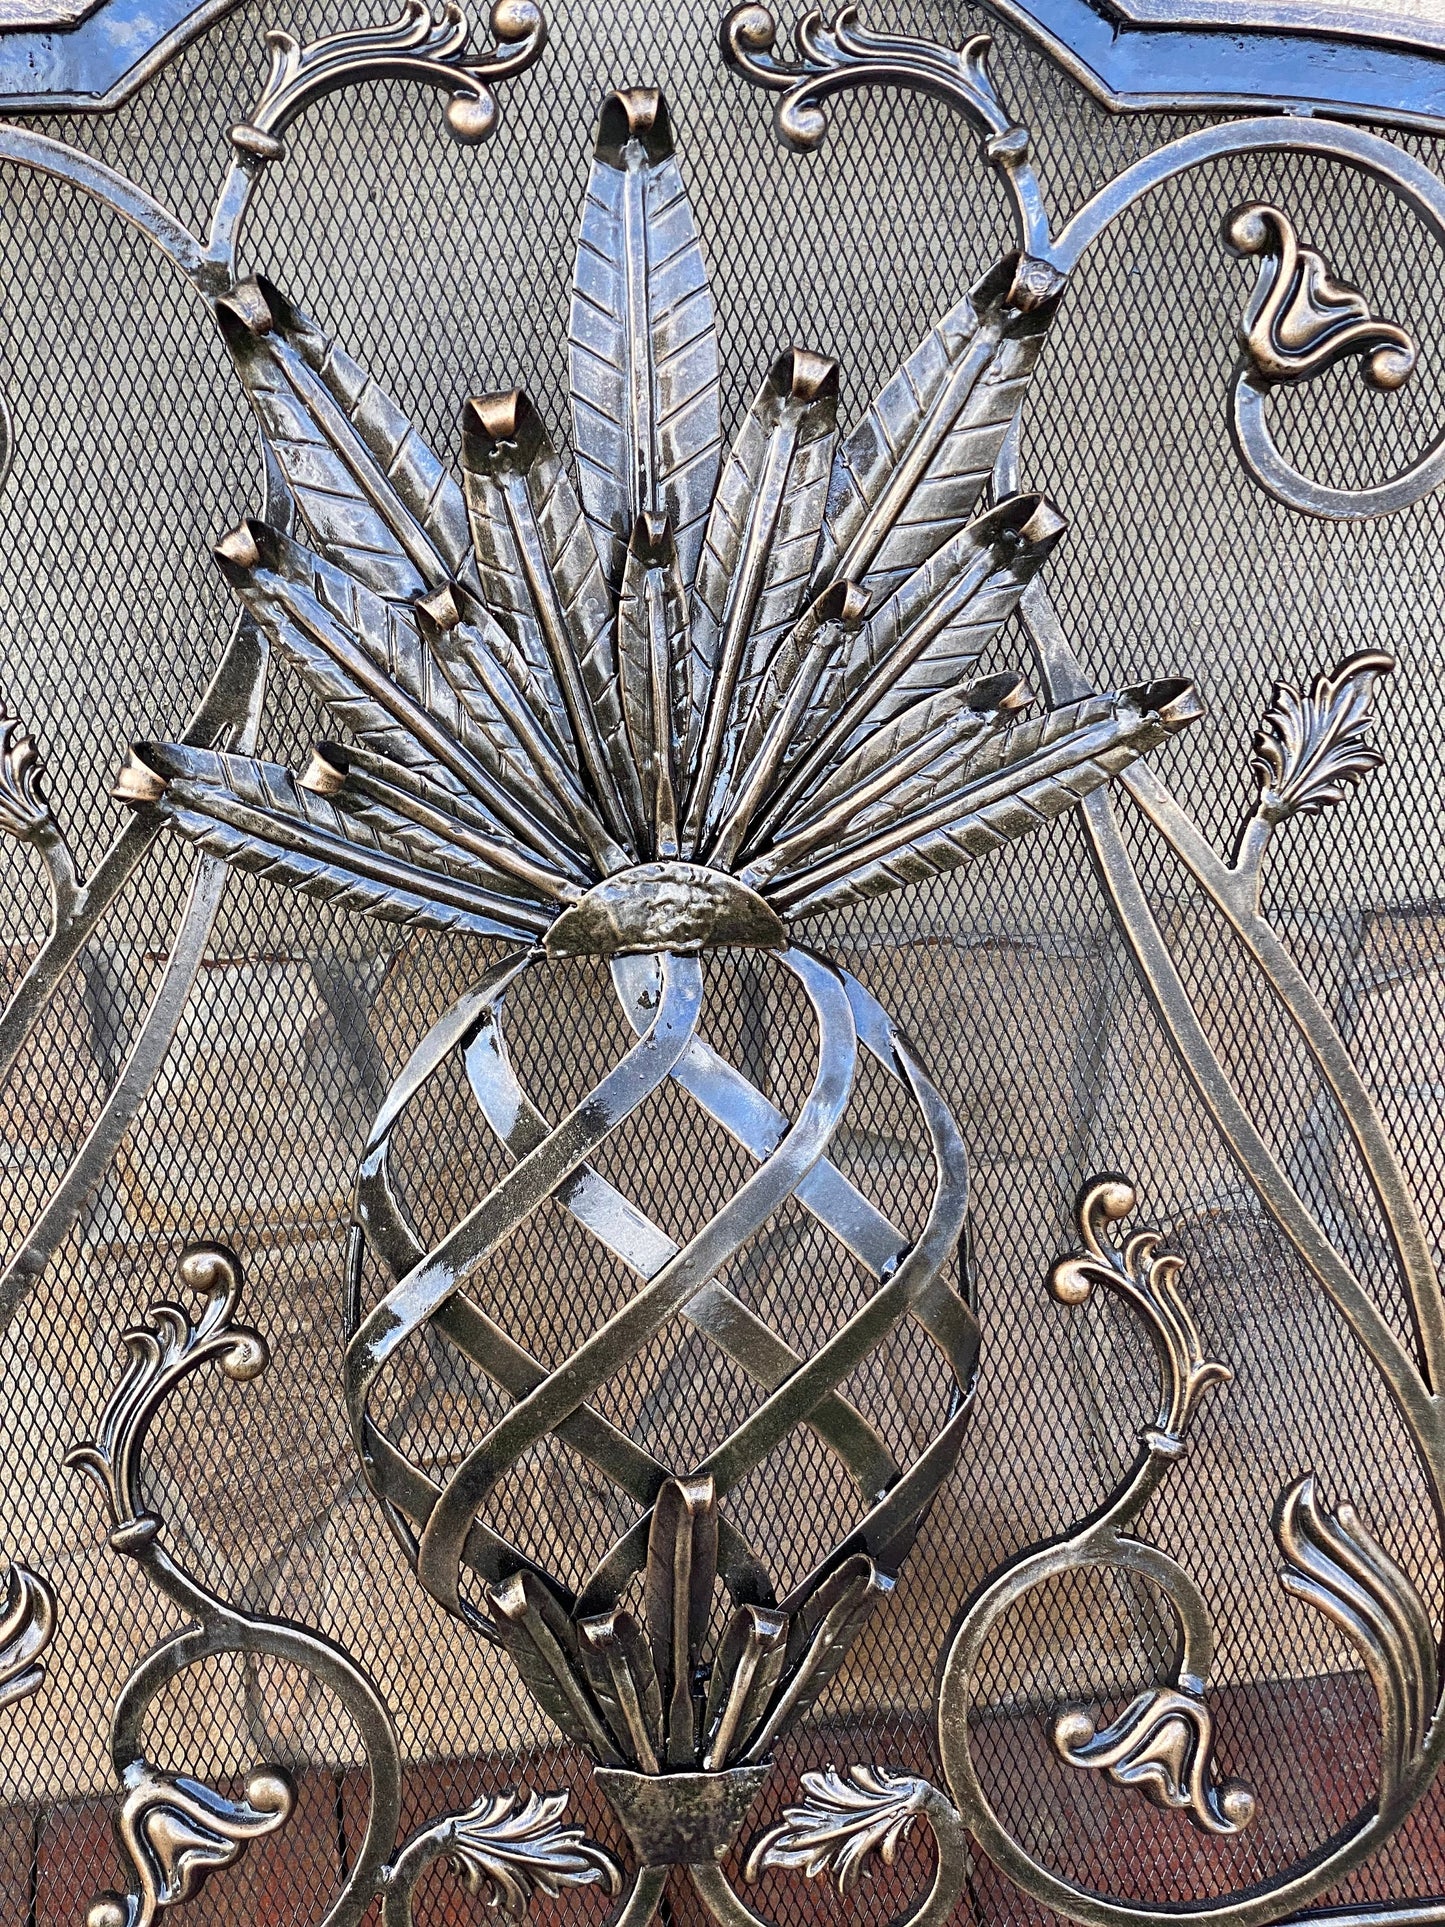 Fireplace screen, iron gift, fireplace decor, fire poker, anniversary gift, pineapple, fireplace, Christmas, birthday, BBQ, grill, medieval